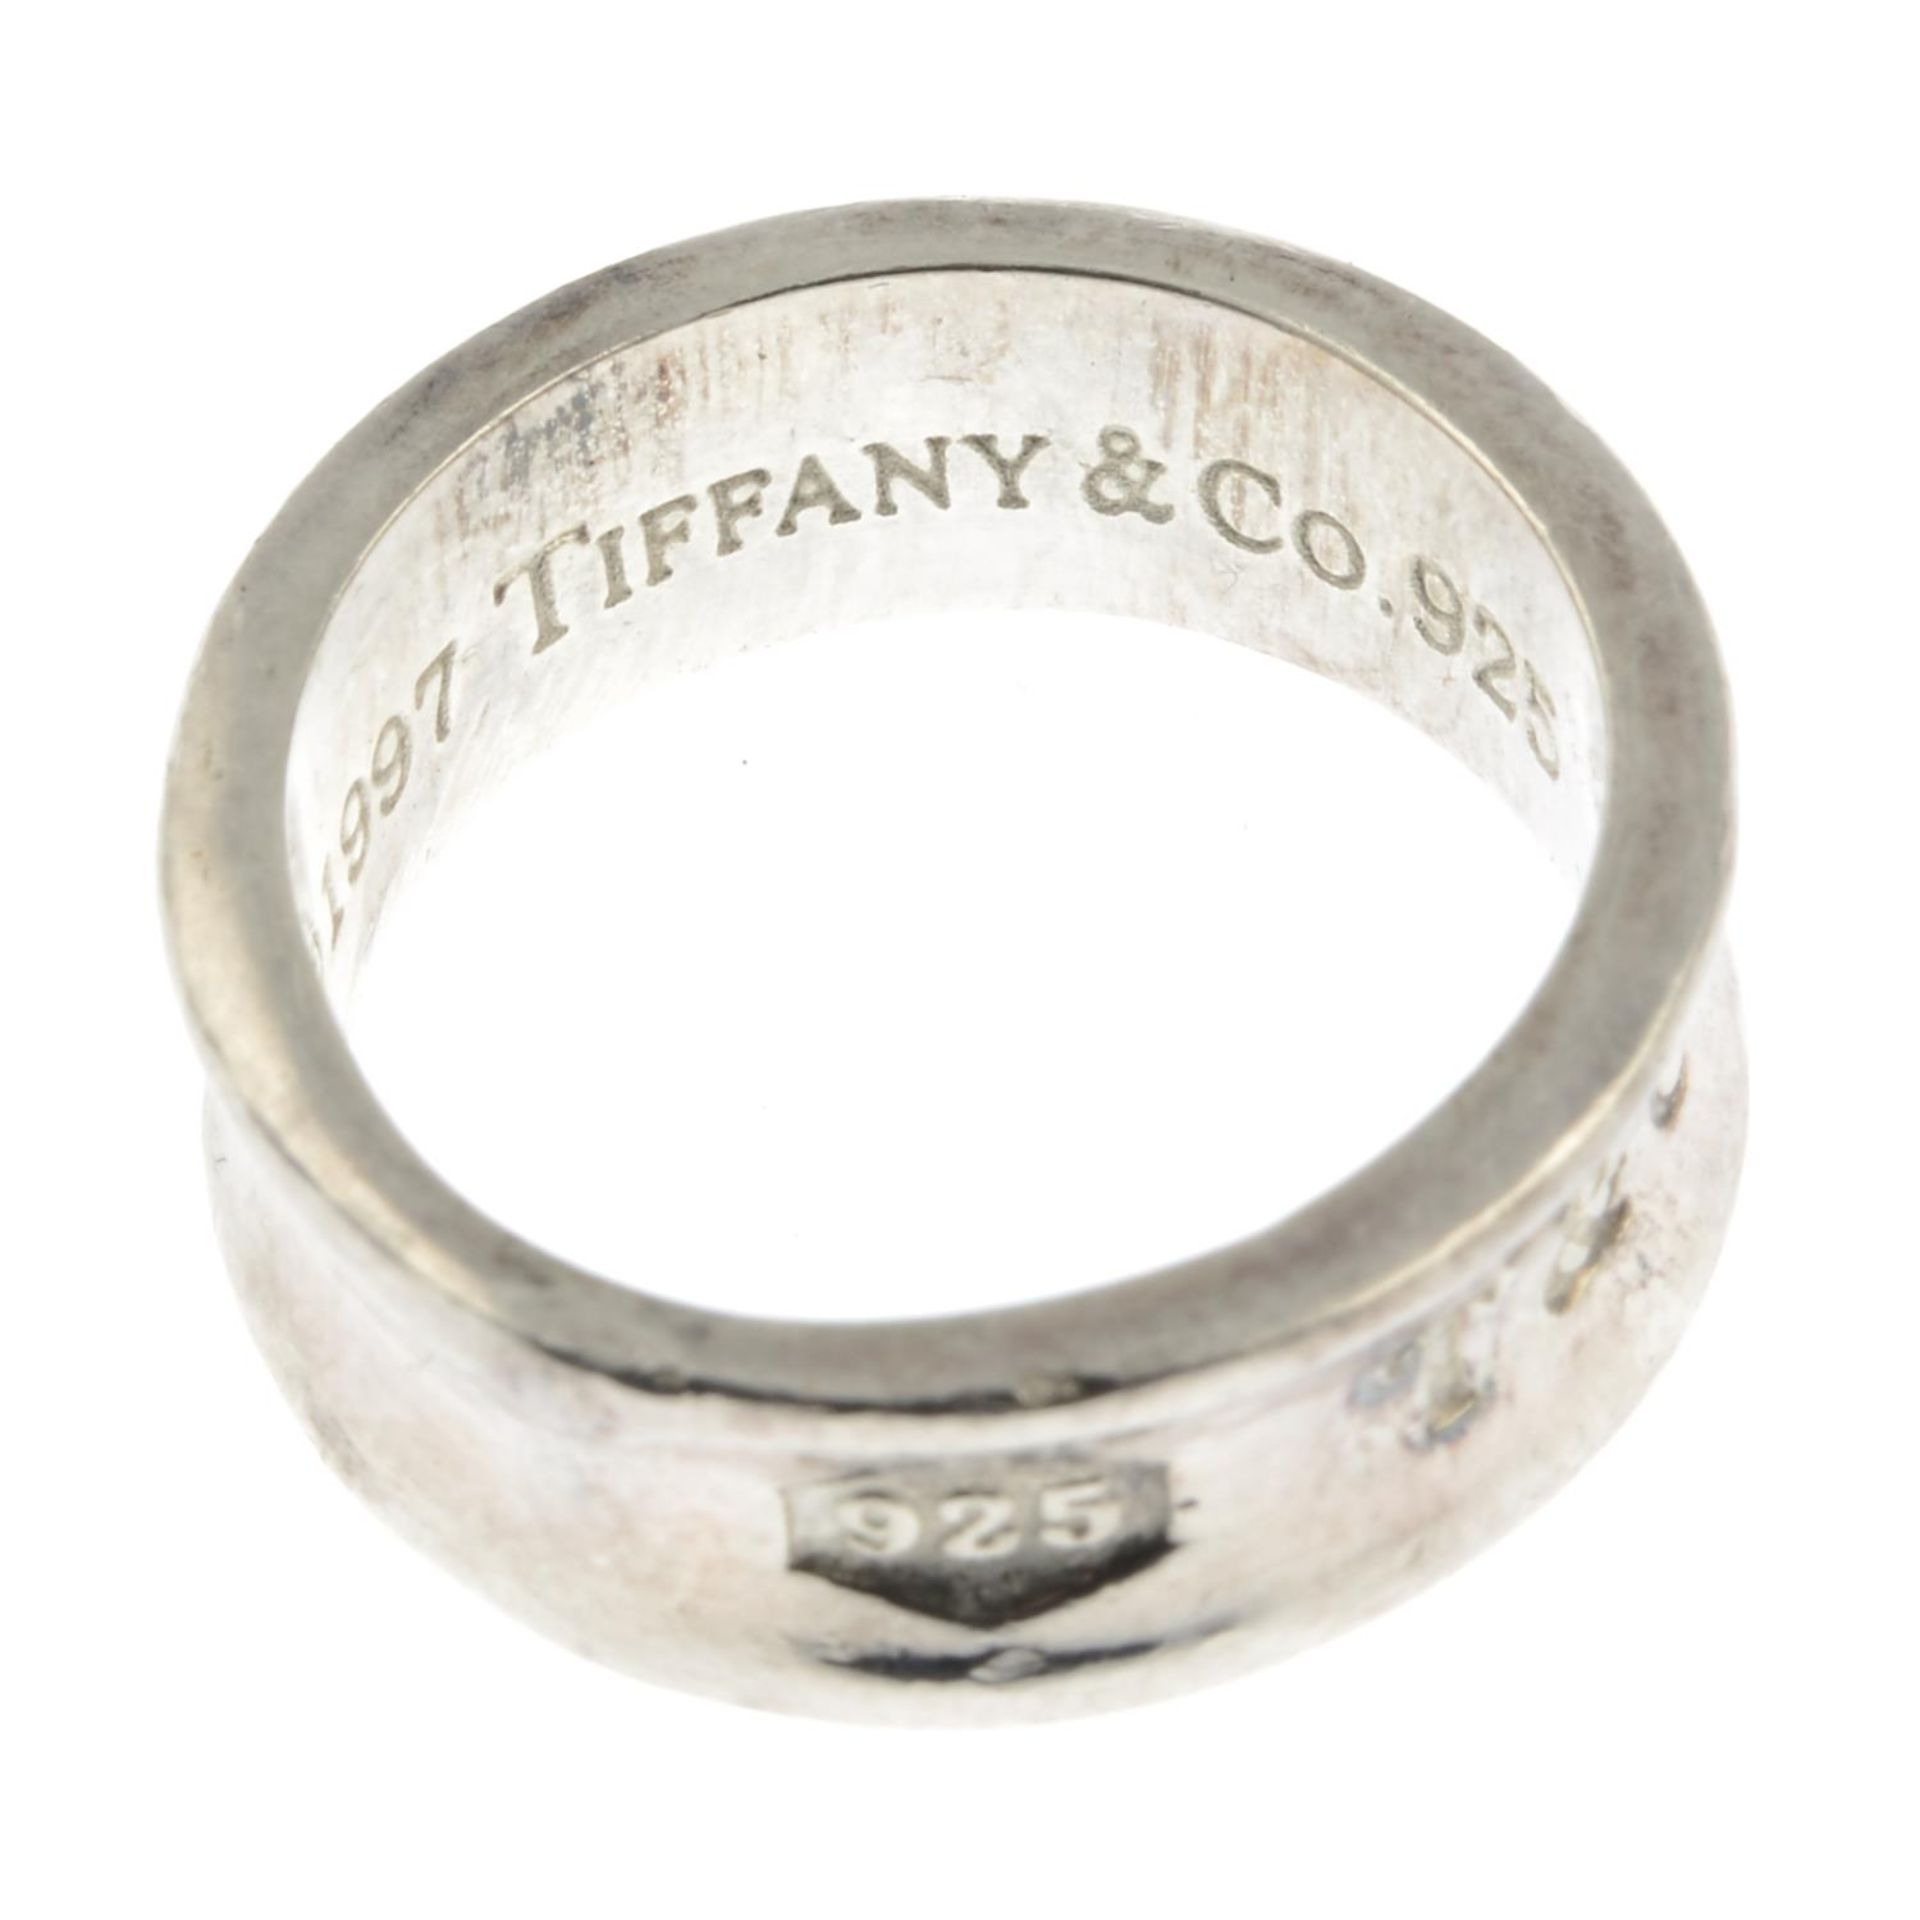 An '1837' band ring, by Tiffany & Co. - Image 2 of 2